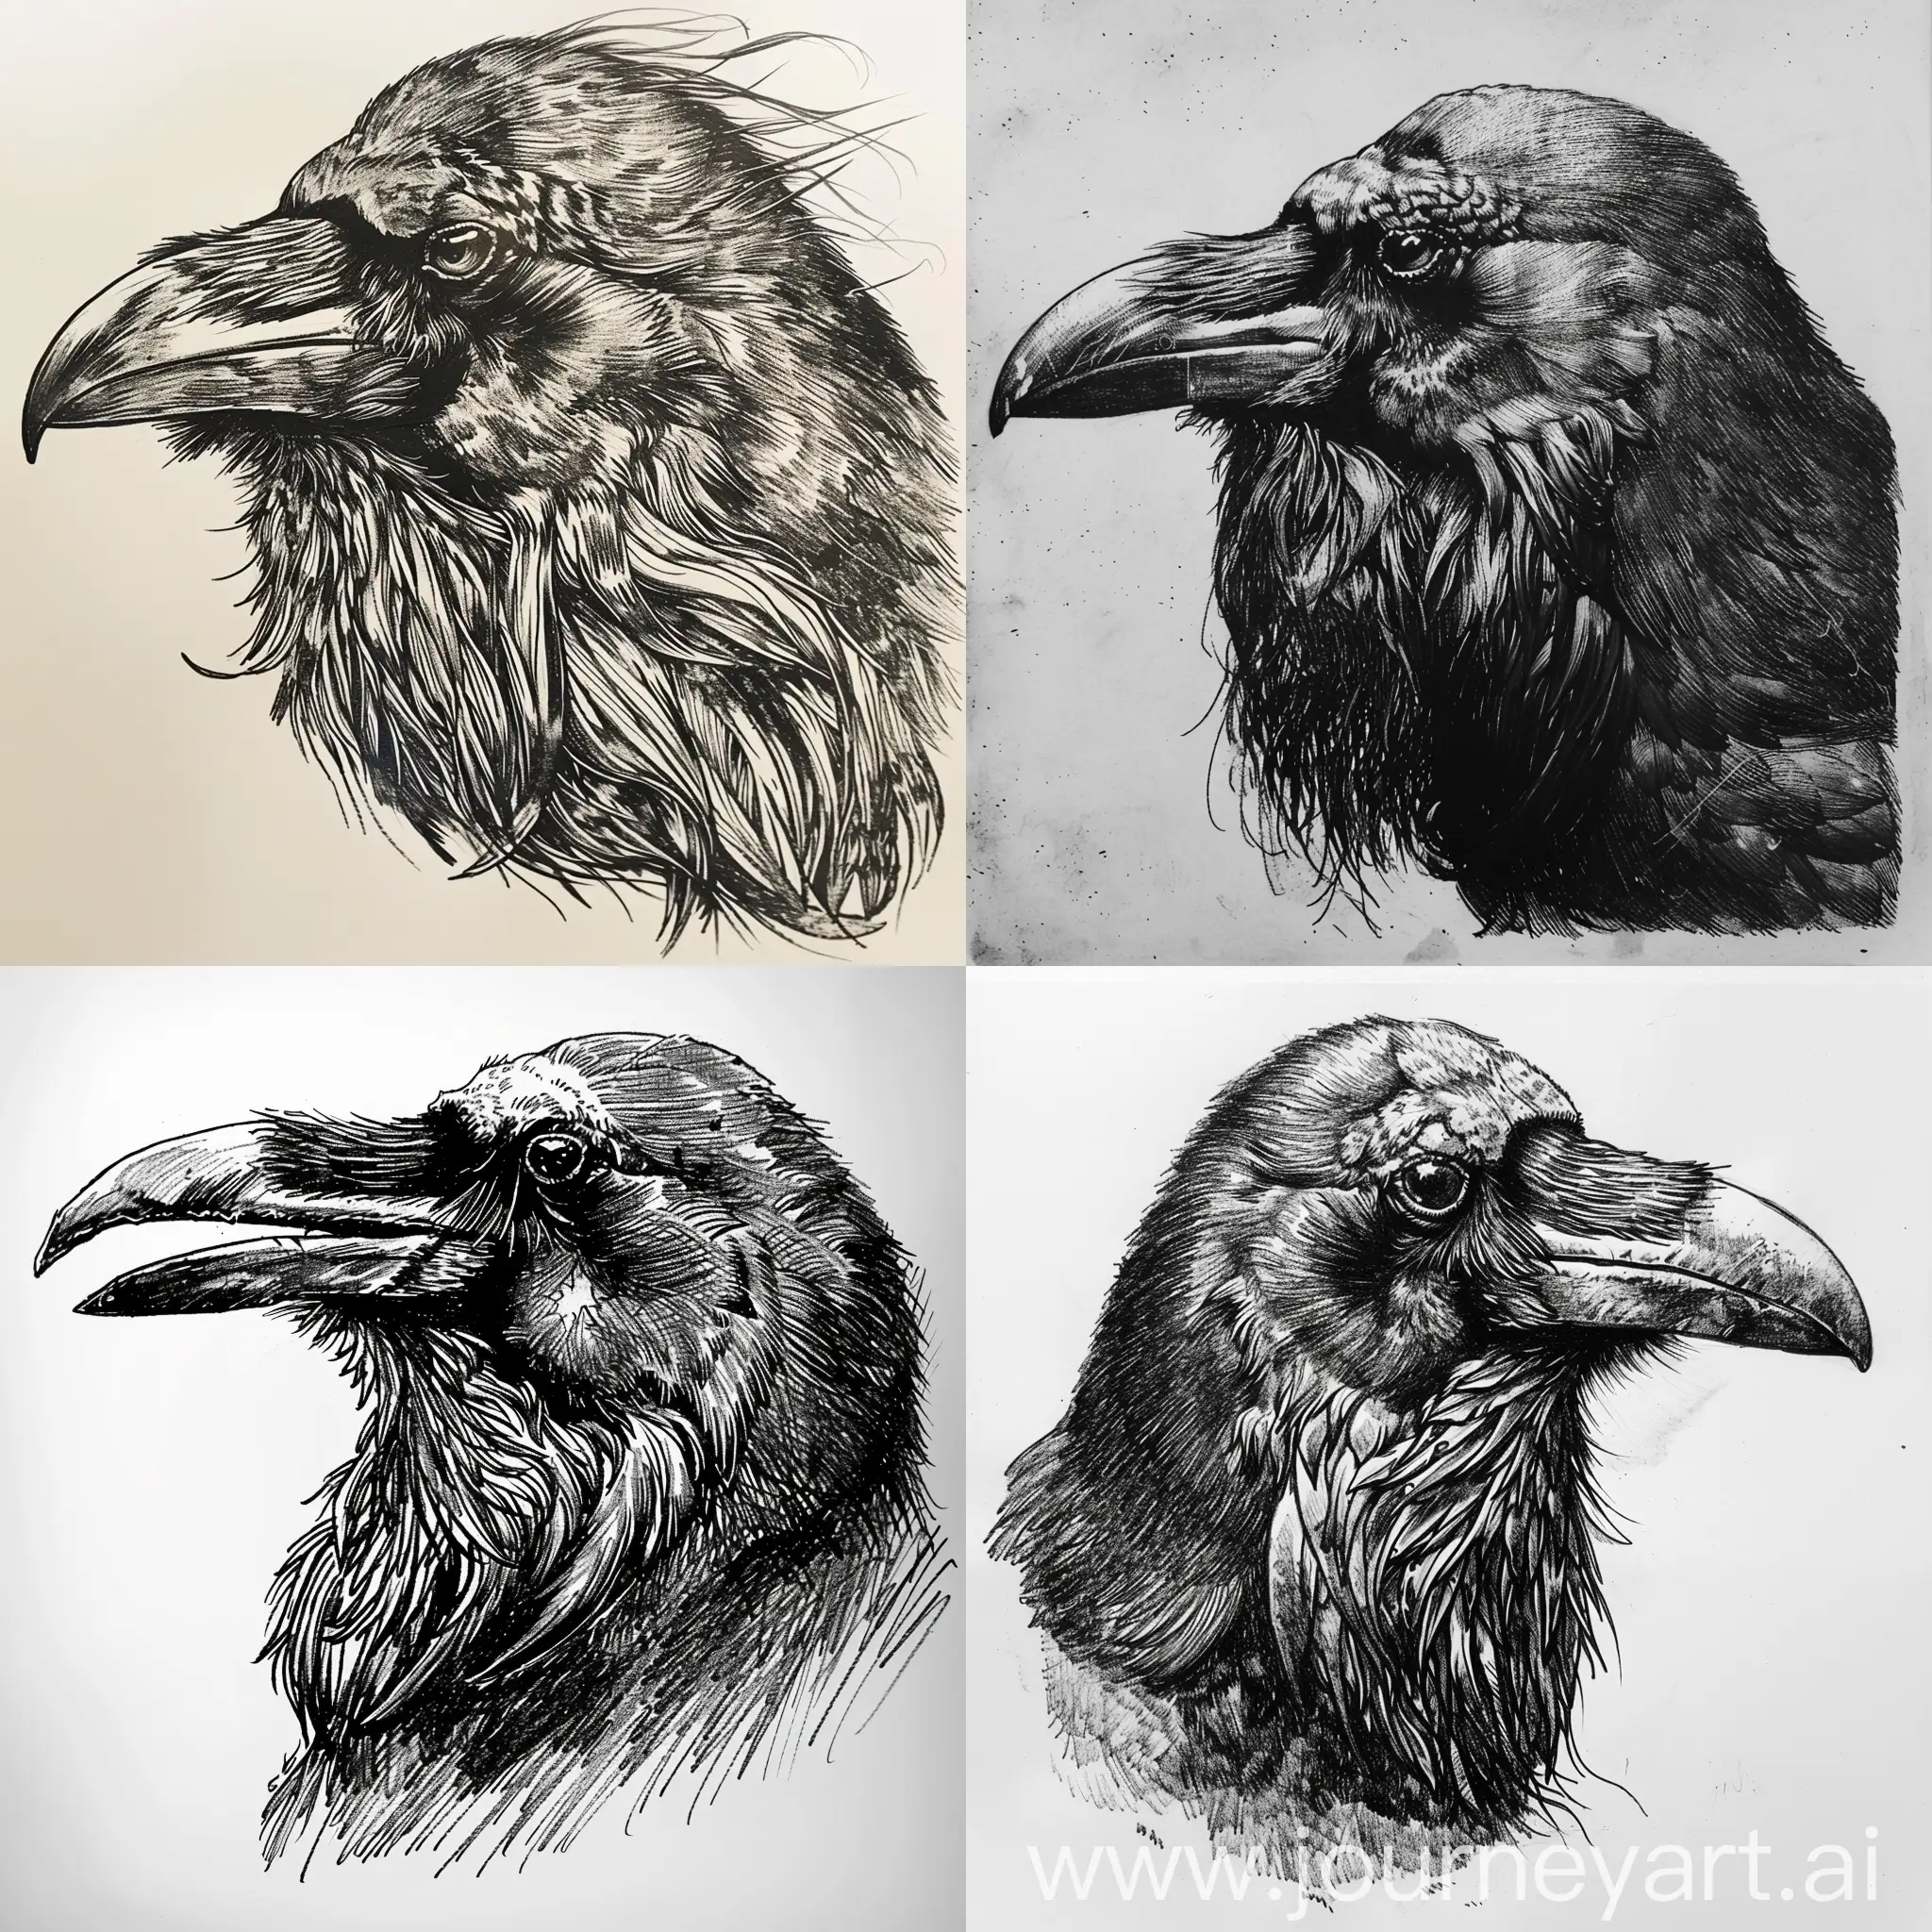 Detailed-Drawing-of-a-Fierce-Raven-with-Distinctive-Beard